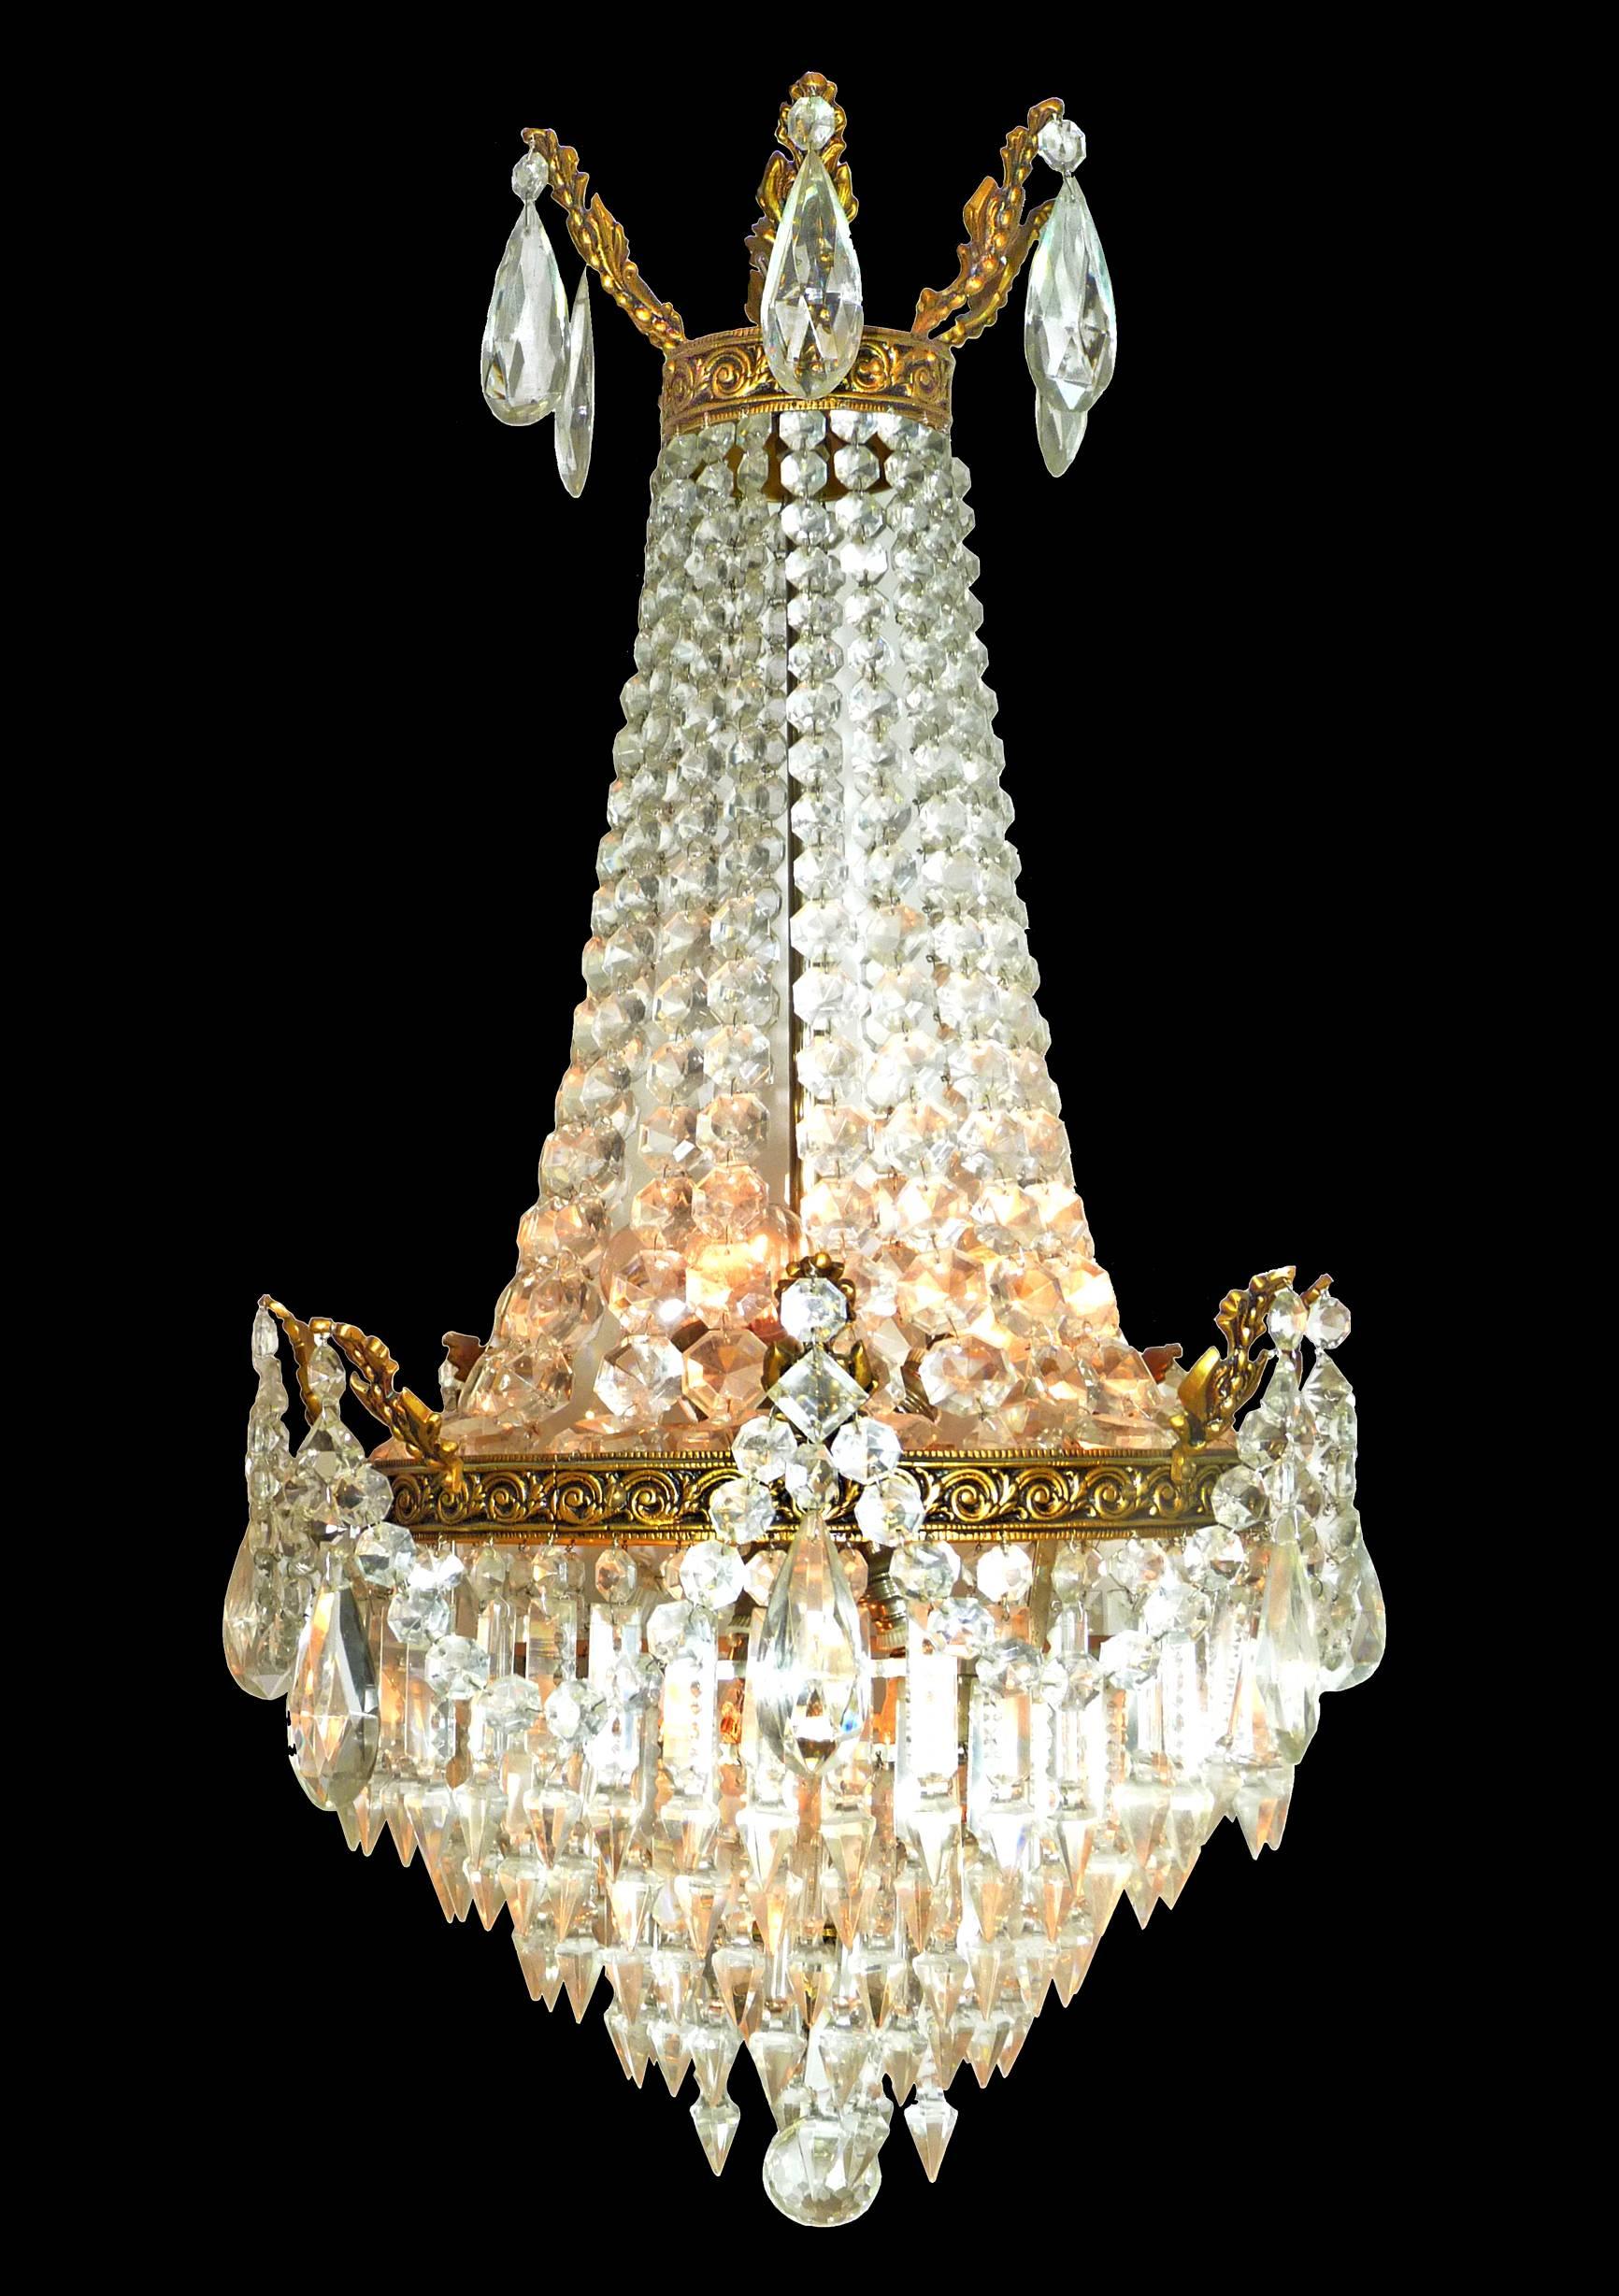 Six-light French empire chiselled gilt bronze chandelier with cut crystals plums and
Measures:
Diameter 16 in/ 40 cm
Height 52 in =30 in + 22 in/chain (130 cm= 75 cm + 55 cm/ chain) 
Weight 22 lb/ 10 Kg
Six-light bulbs E14, good working